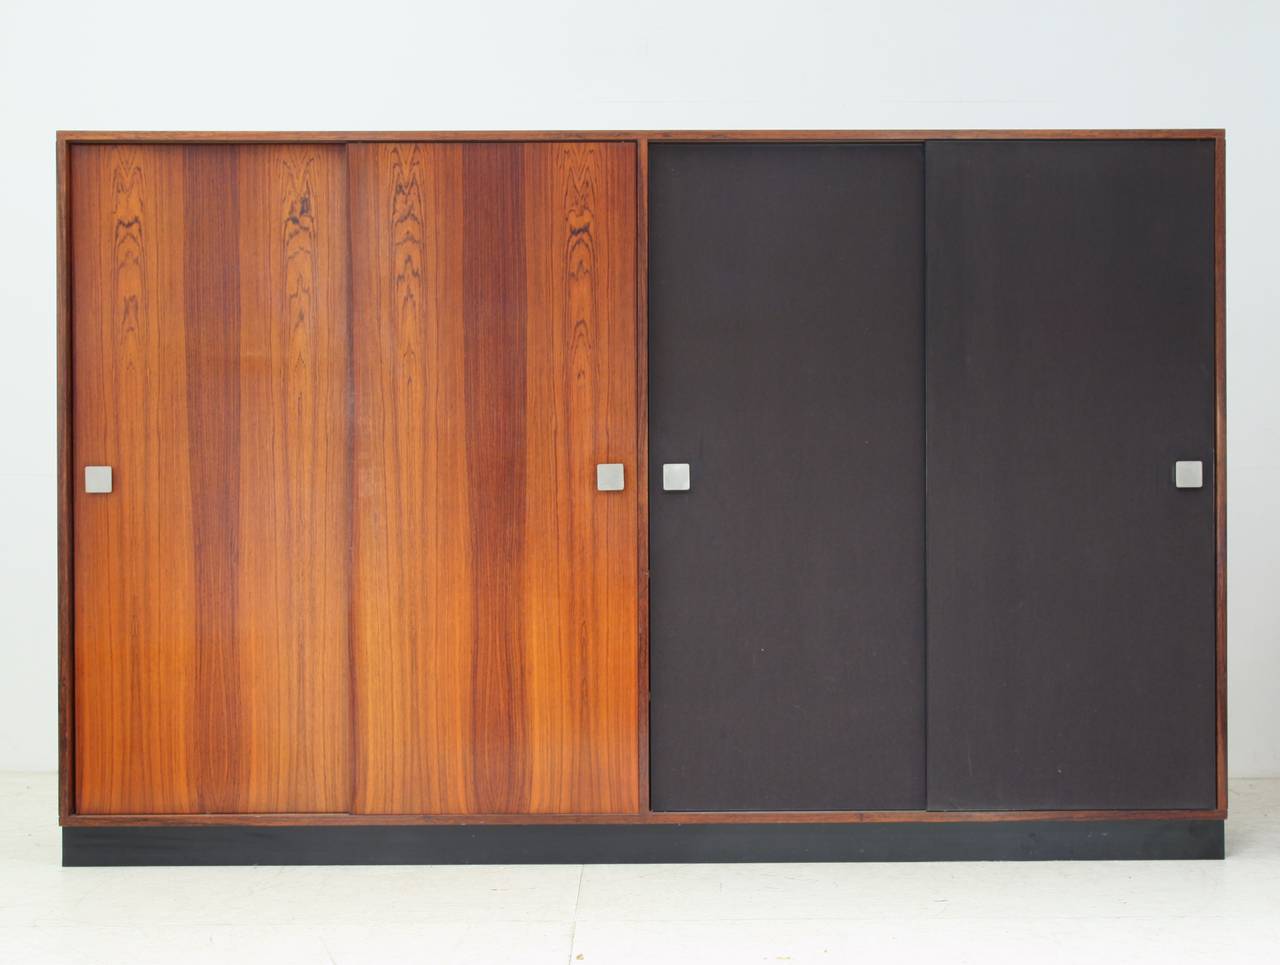 A gorgeous and hard to find large Mid-Century wardrobe by Belgian designer Alfred Hendrickx. It is made of a wonderful rosewood.
The wardrobe holds four sliding doors, one section for hanging clothes and the other section with shelves. 
The doors